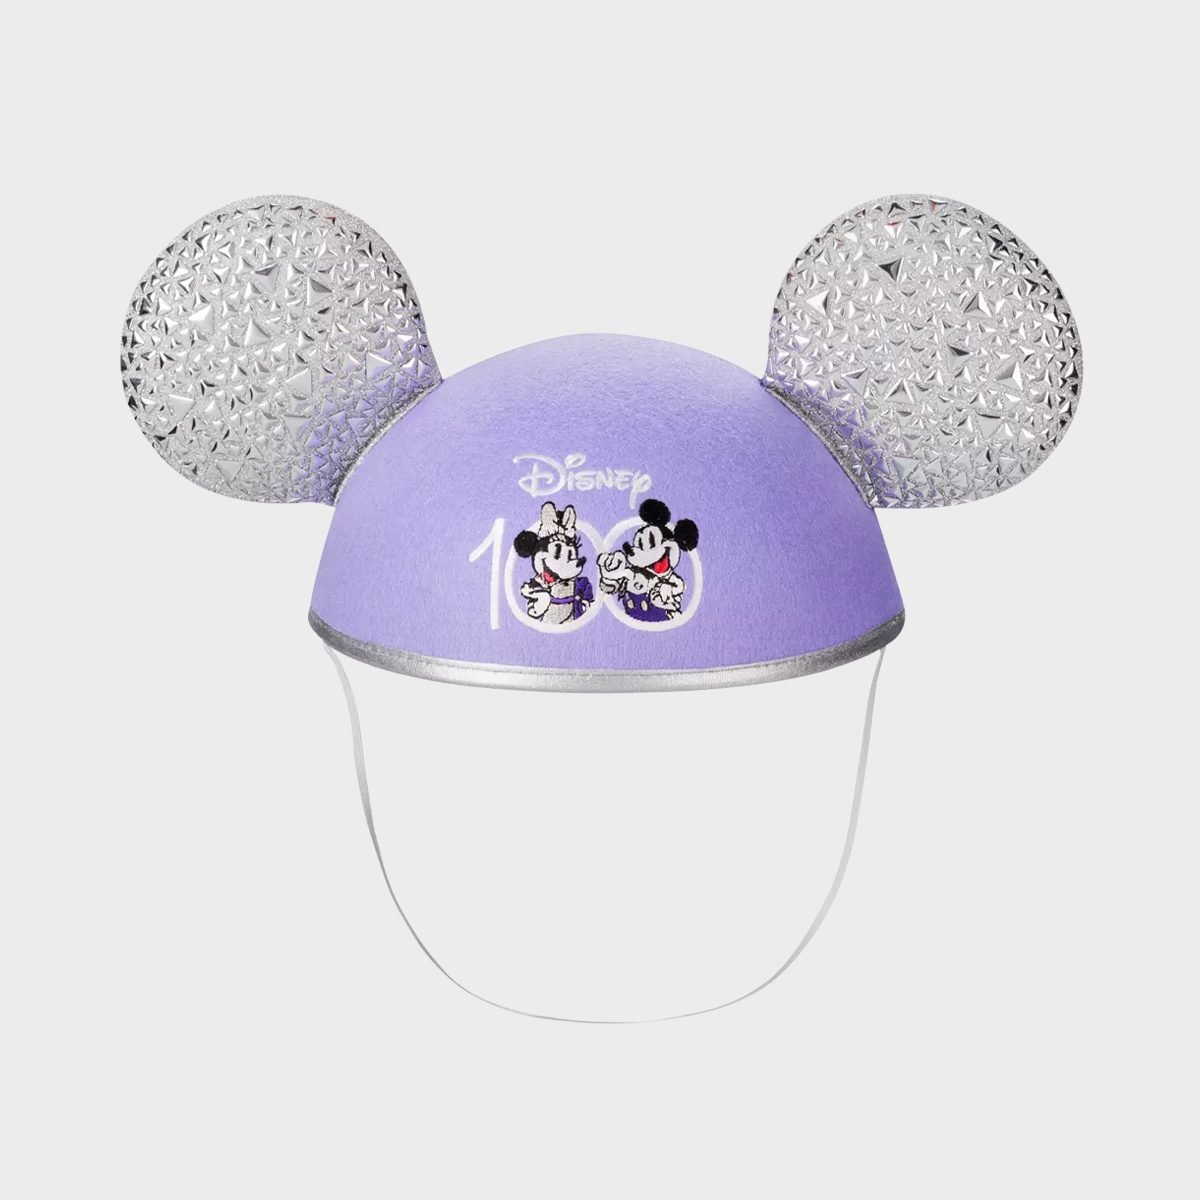 https://www.rd.com/wp-content/uploads/2023/02/Mickey-and-Minnie-Mouse-Disney100-Ear-Hat-for-Adults-ecomm-shopdisney.com_.jpg?fit=700%2C700